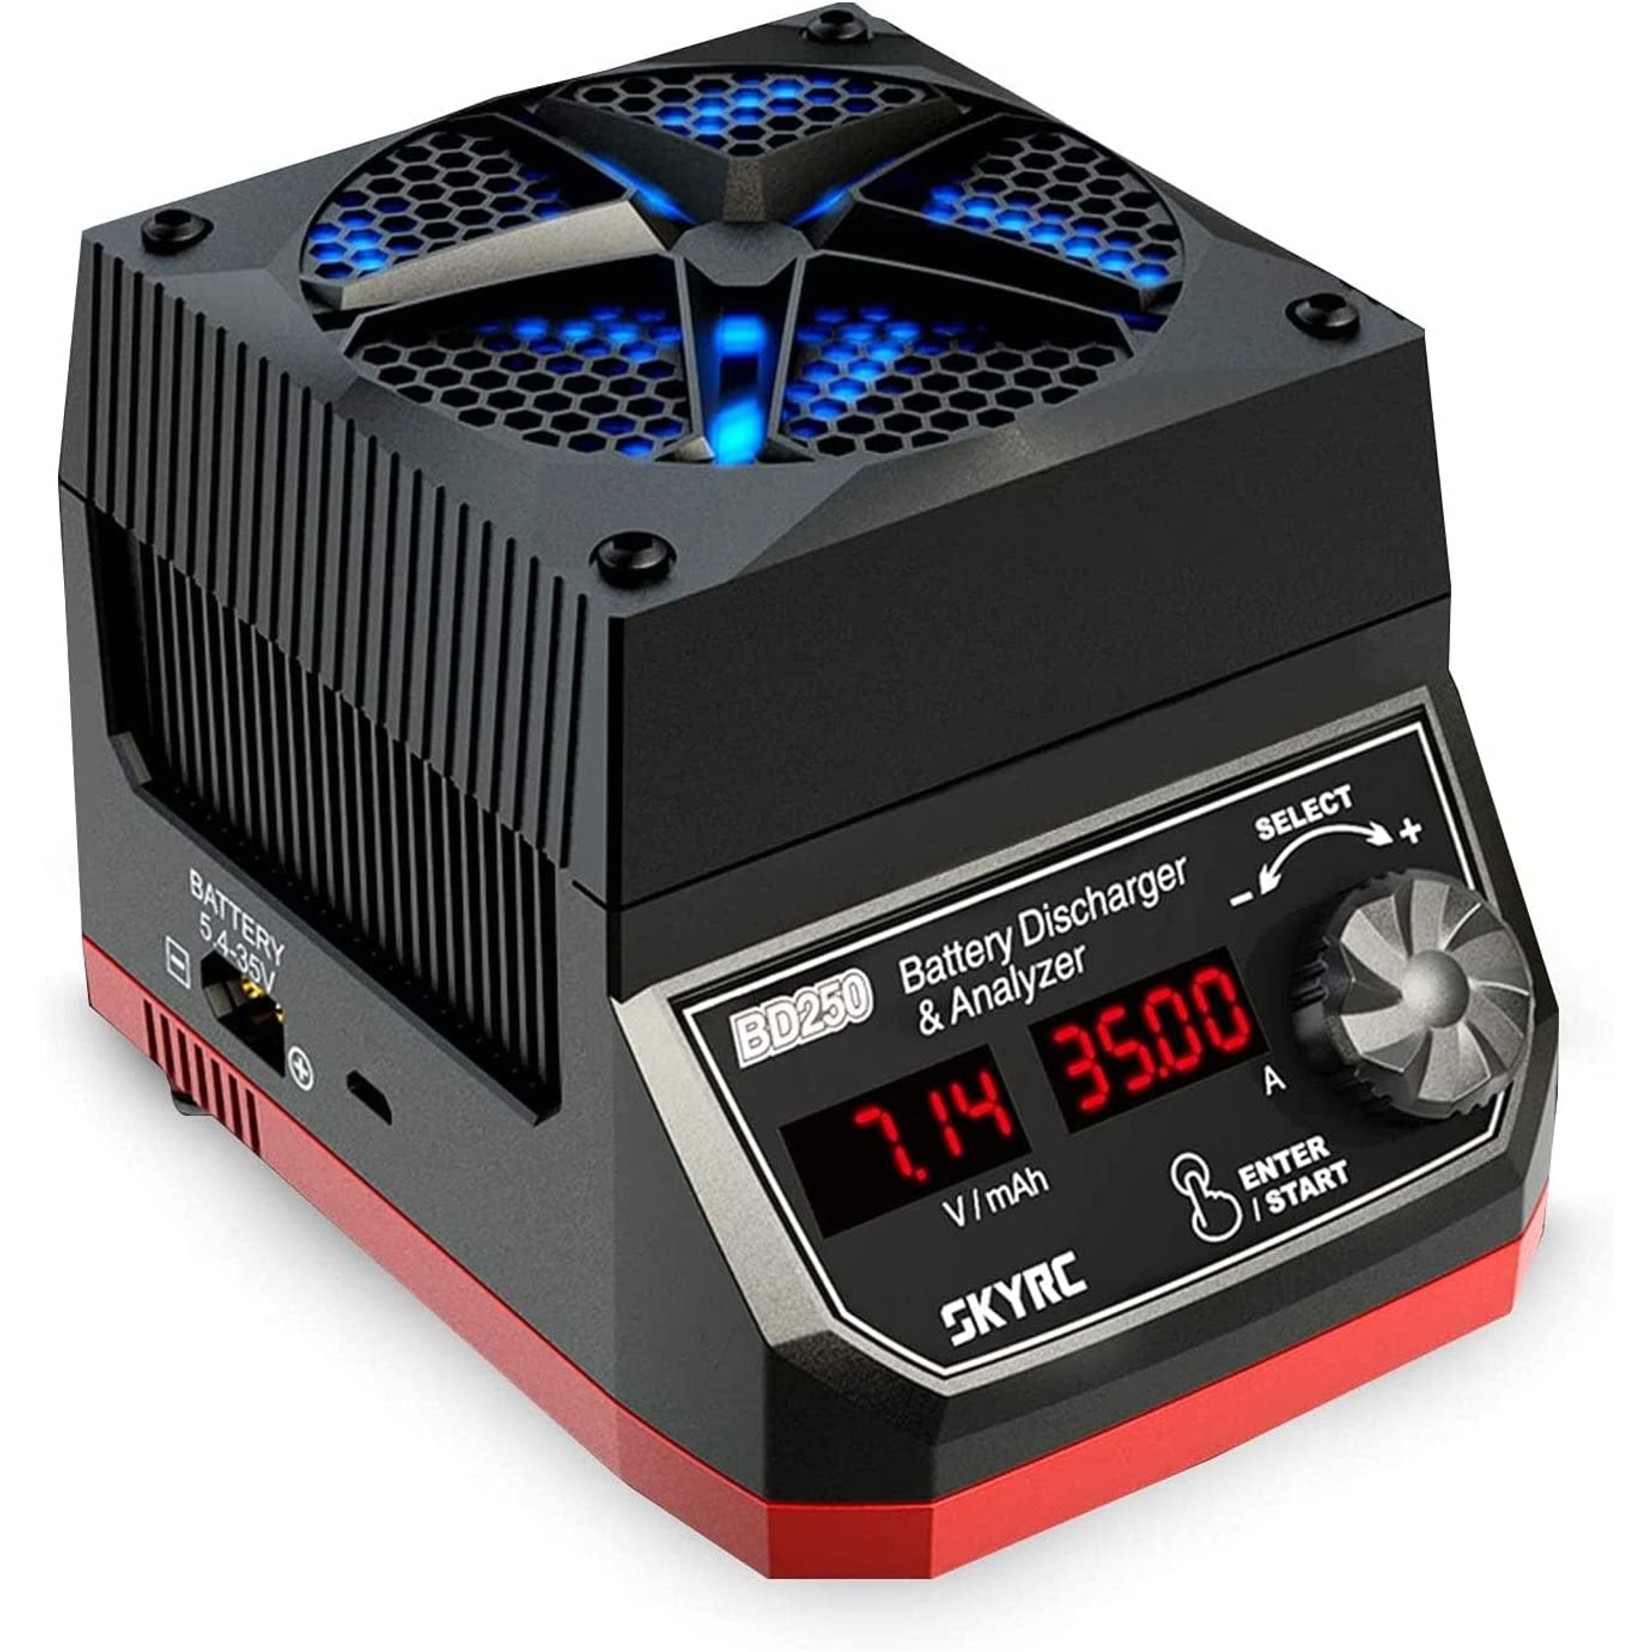 Sky RC BD250 250W/35A Battery Discharger and Analyzer